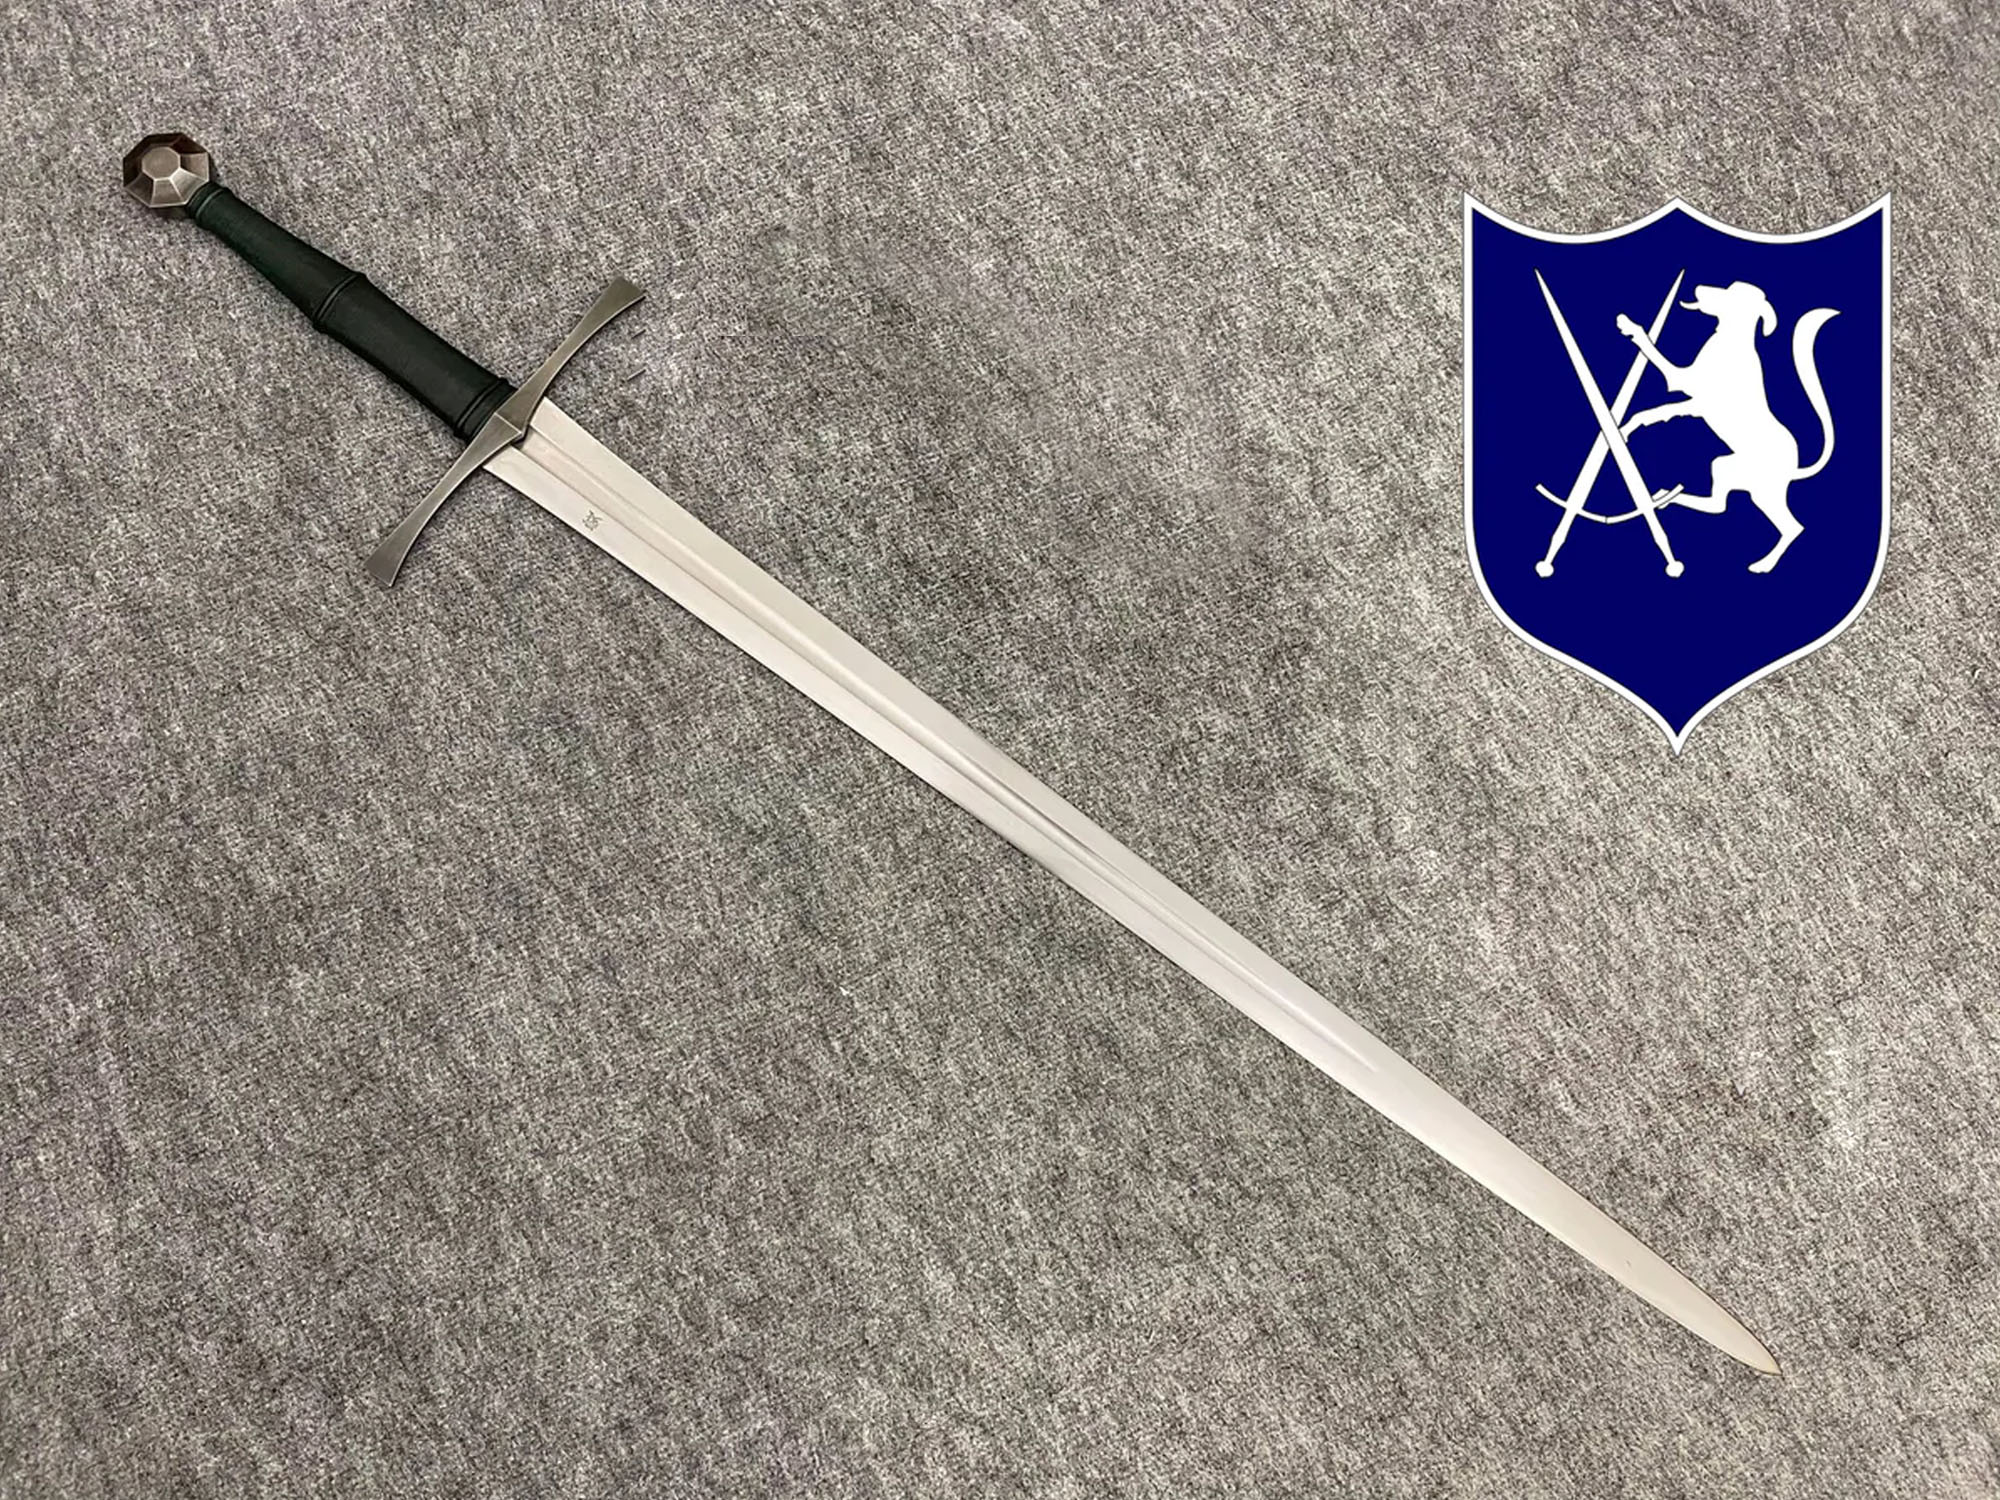 The Exeter Sword, handforged and sharp blade